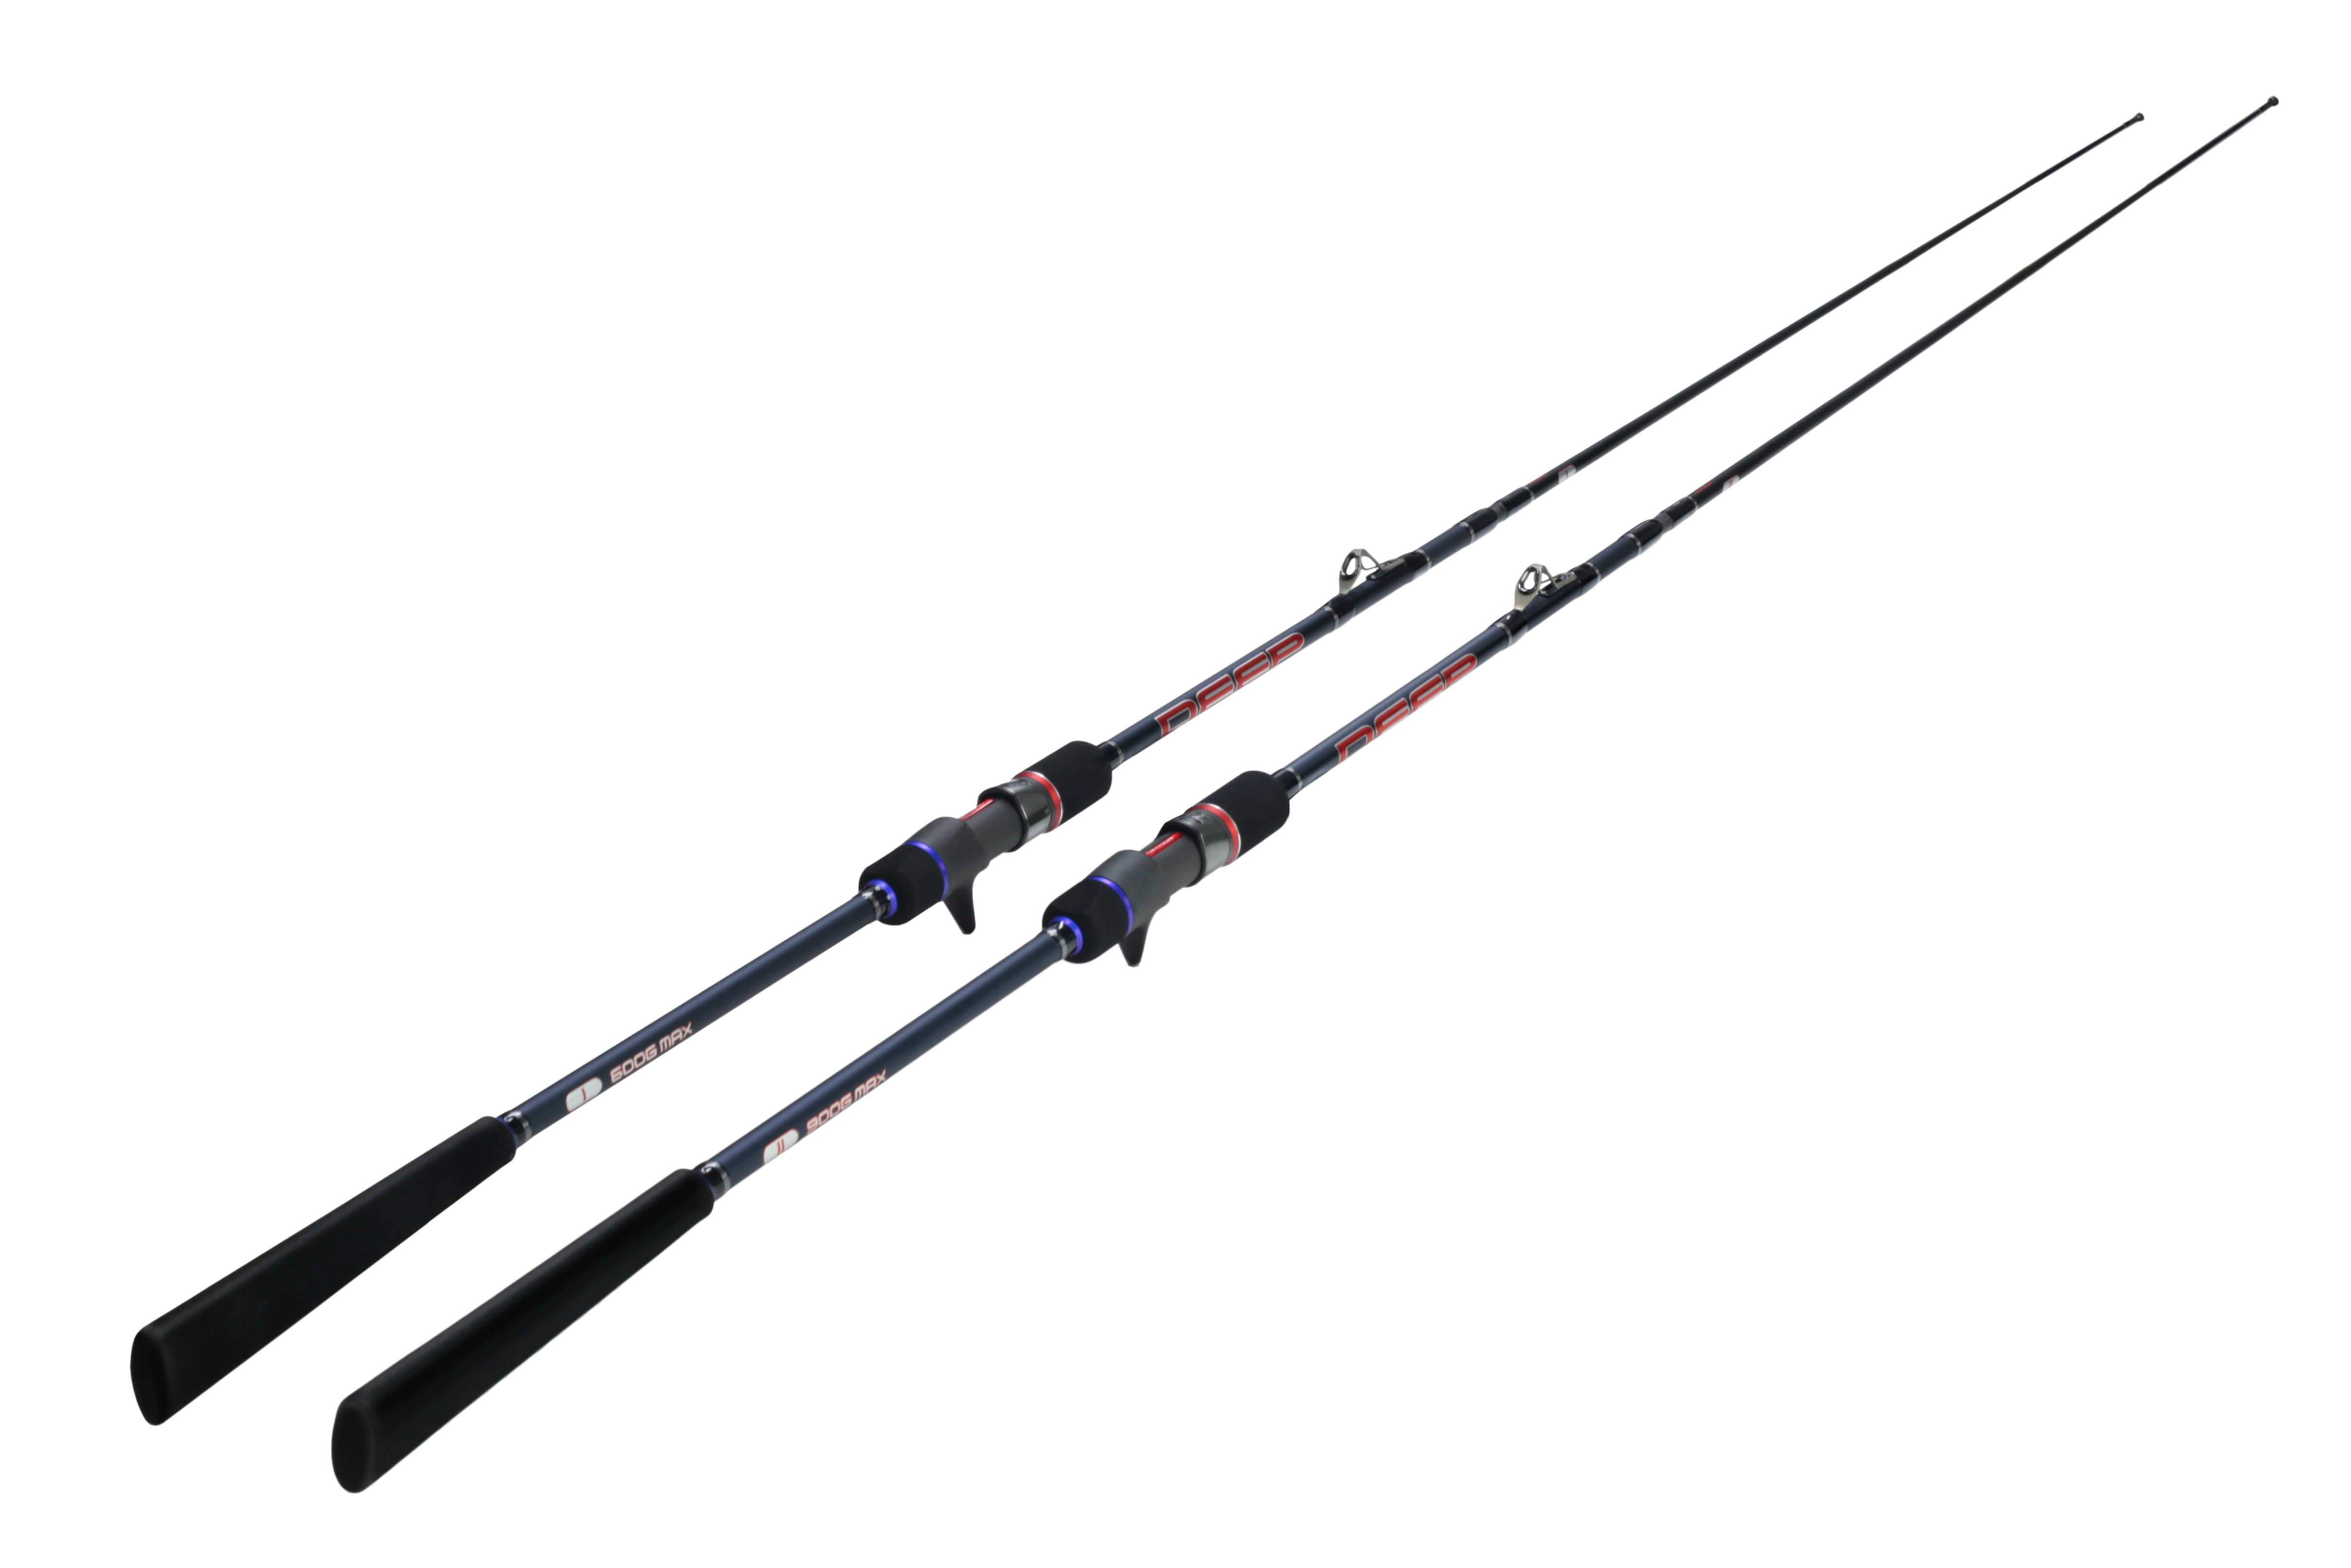 Slow Pitch Jigging Rod - Temple Reef - SPATHE DEEP (Inline concept